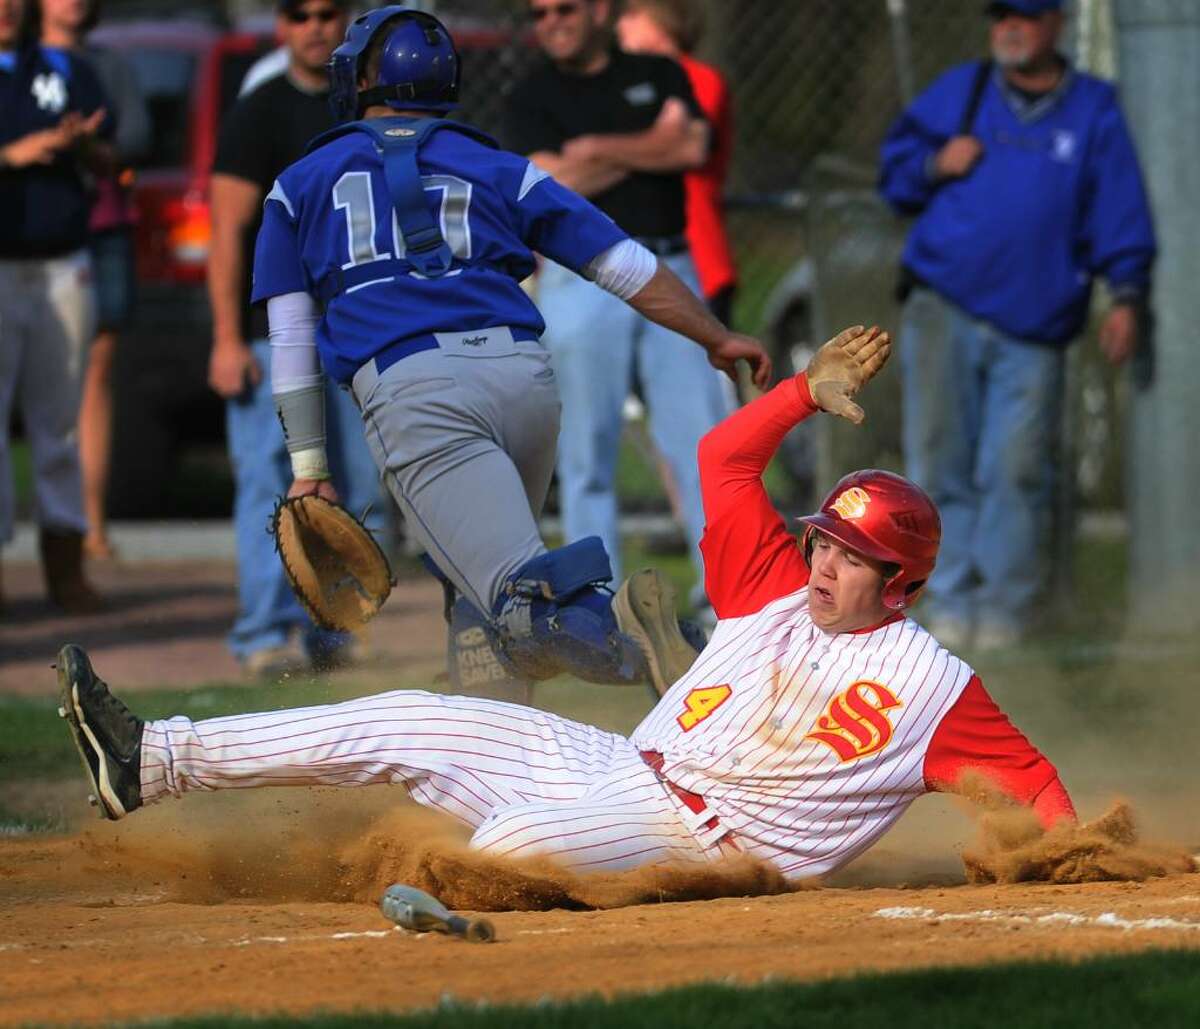 Stratford's Jordan Weiss scores from third on a sacrifice fly in the 6th inning of Stratford's 5-0 win over rival Bunnell at Penders Field in Stratford on Wednesday, April 21, 2010.